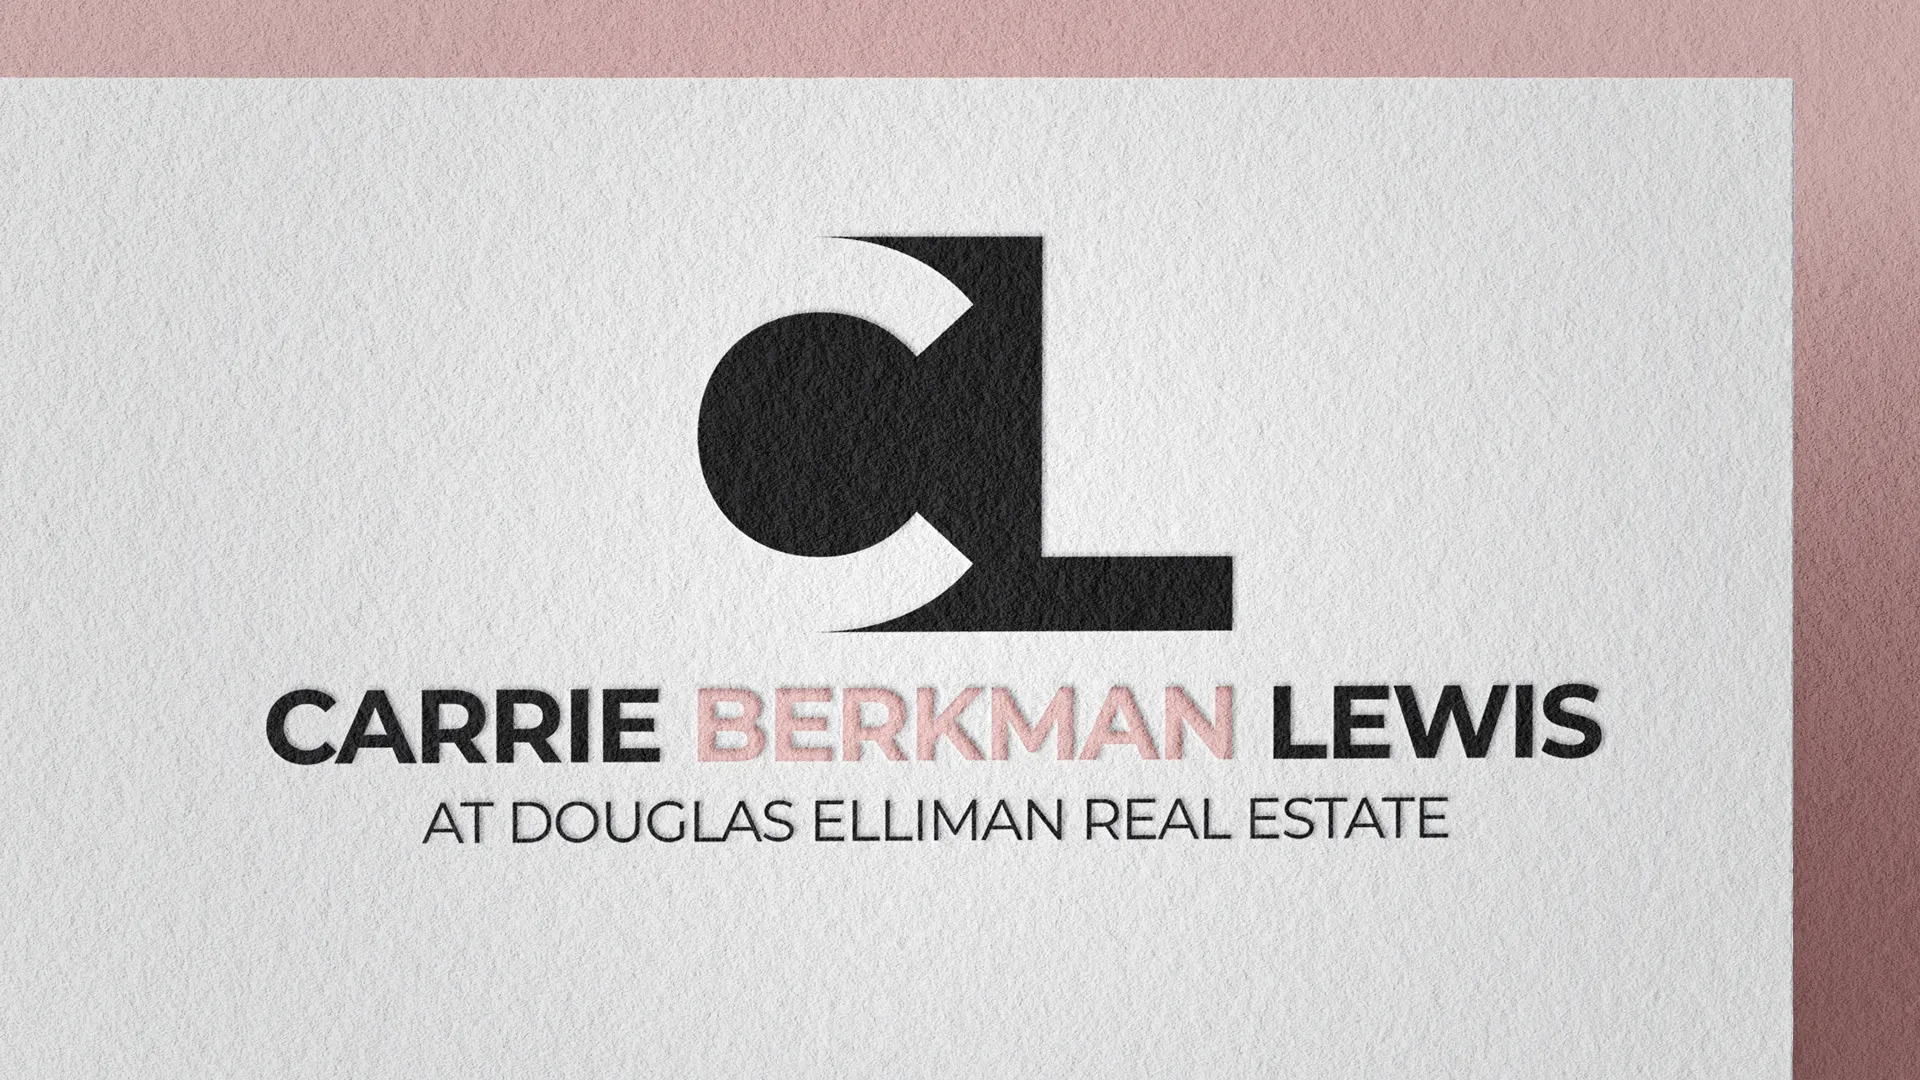 Mockup of Carrie Berkman Lewis's Brand Identity Logo as an embossed mark on textured paper